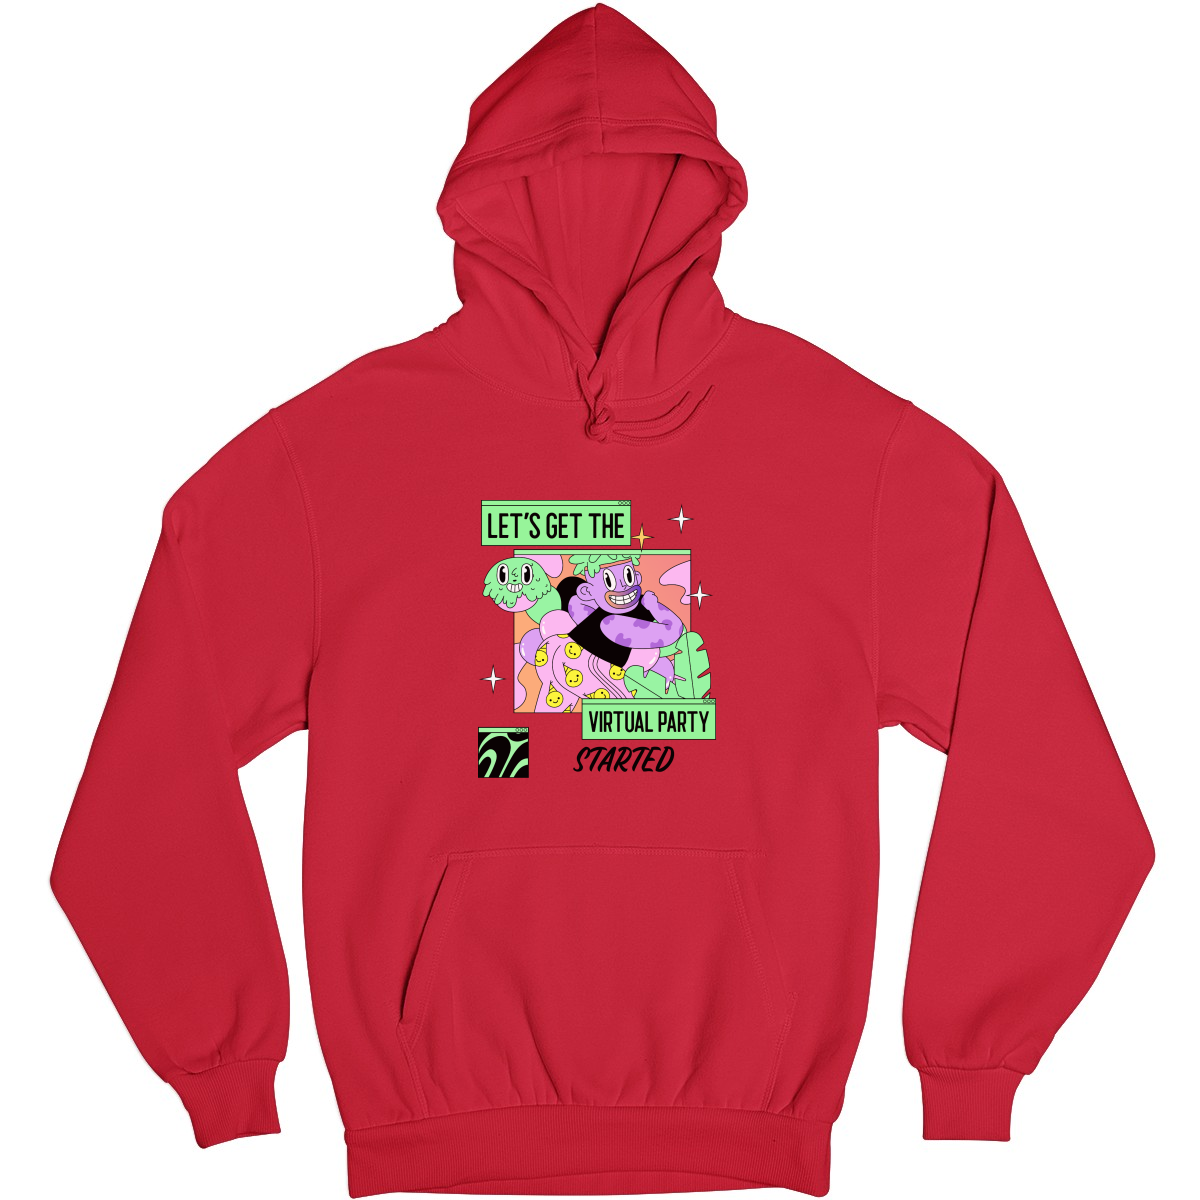 Let's get the virtual party started Unisex Hoodie | Red